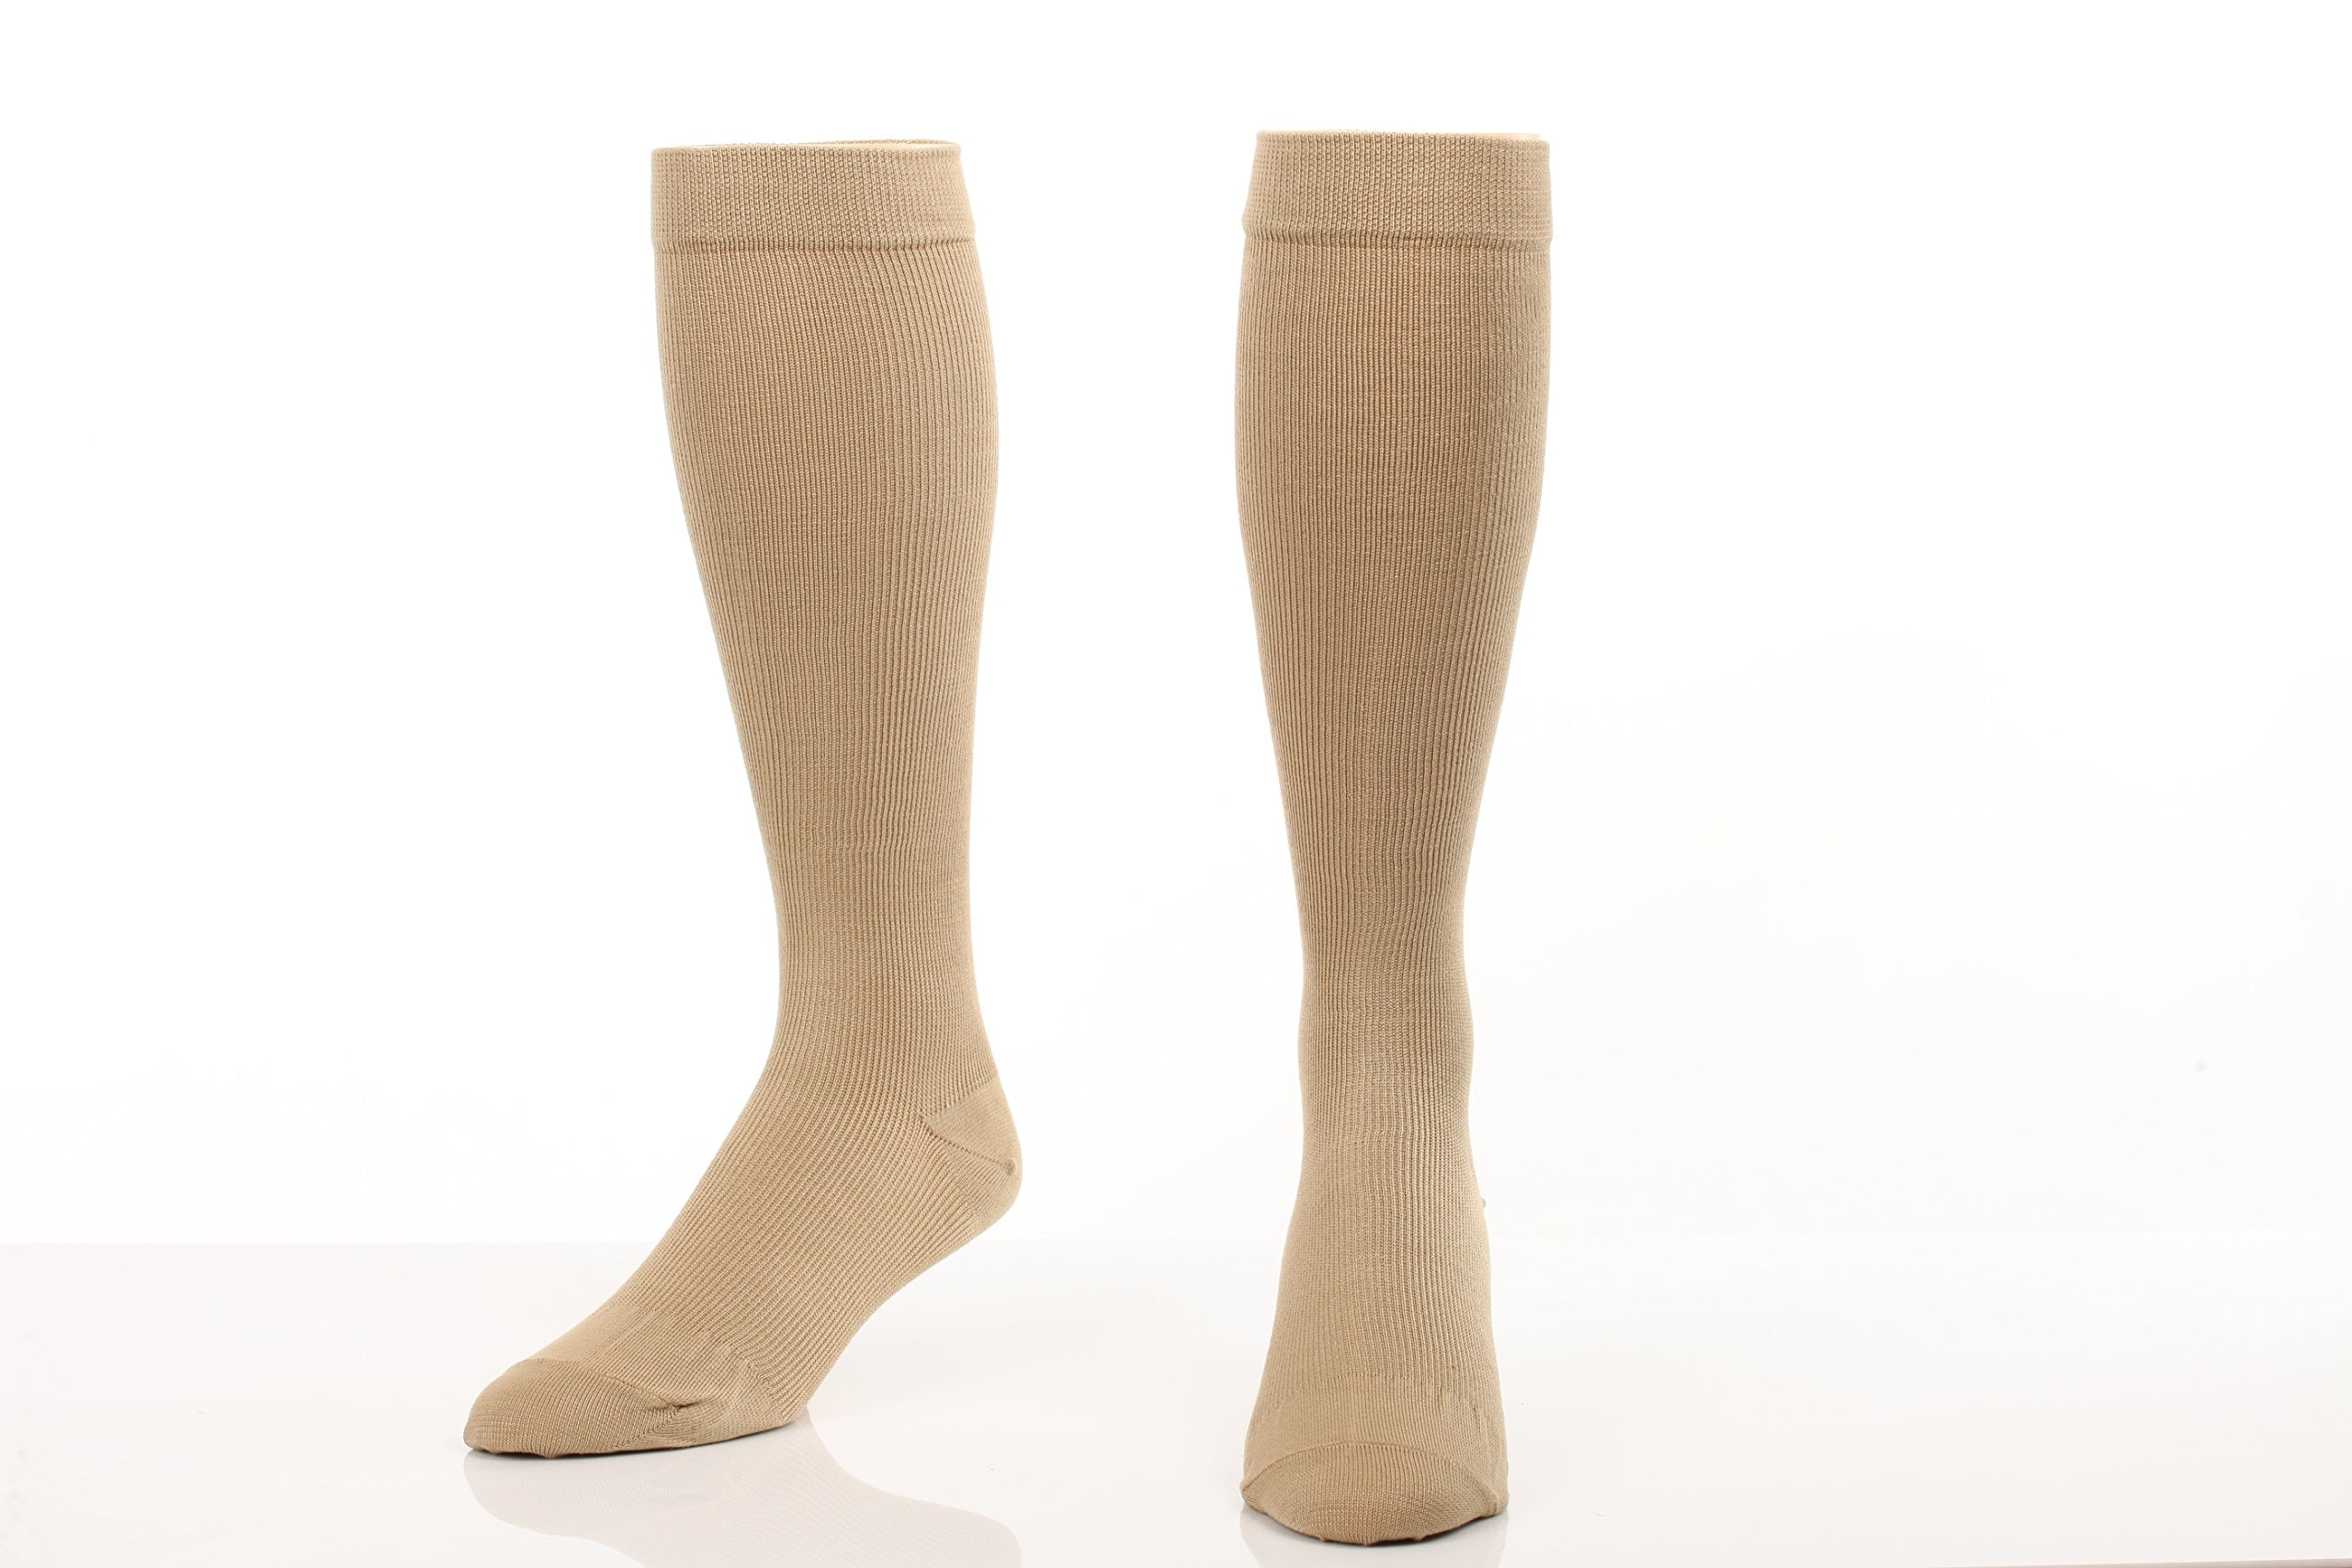 Cotton Compression Socks - Made in the USA - Firm Graduated Medical ...